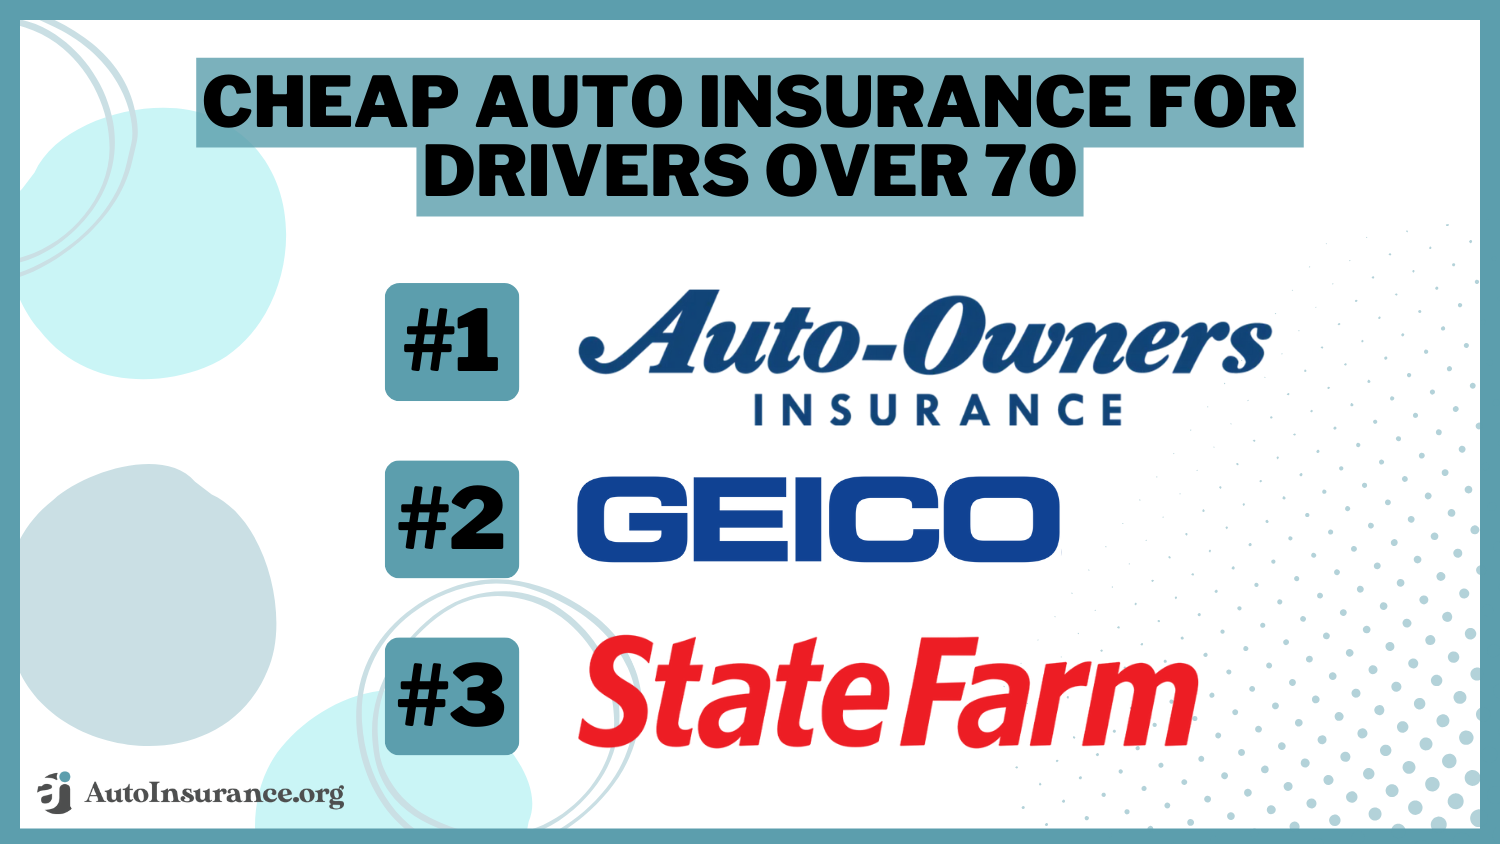 Cheap Auto Insurance for Drivers Over 70 - Auto-Owners, Geico, State Farm